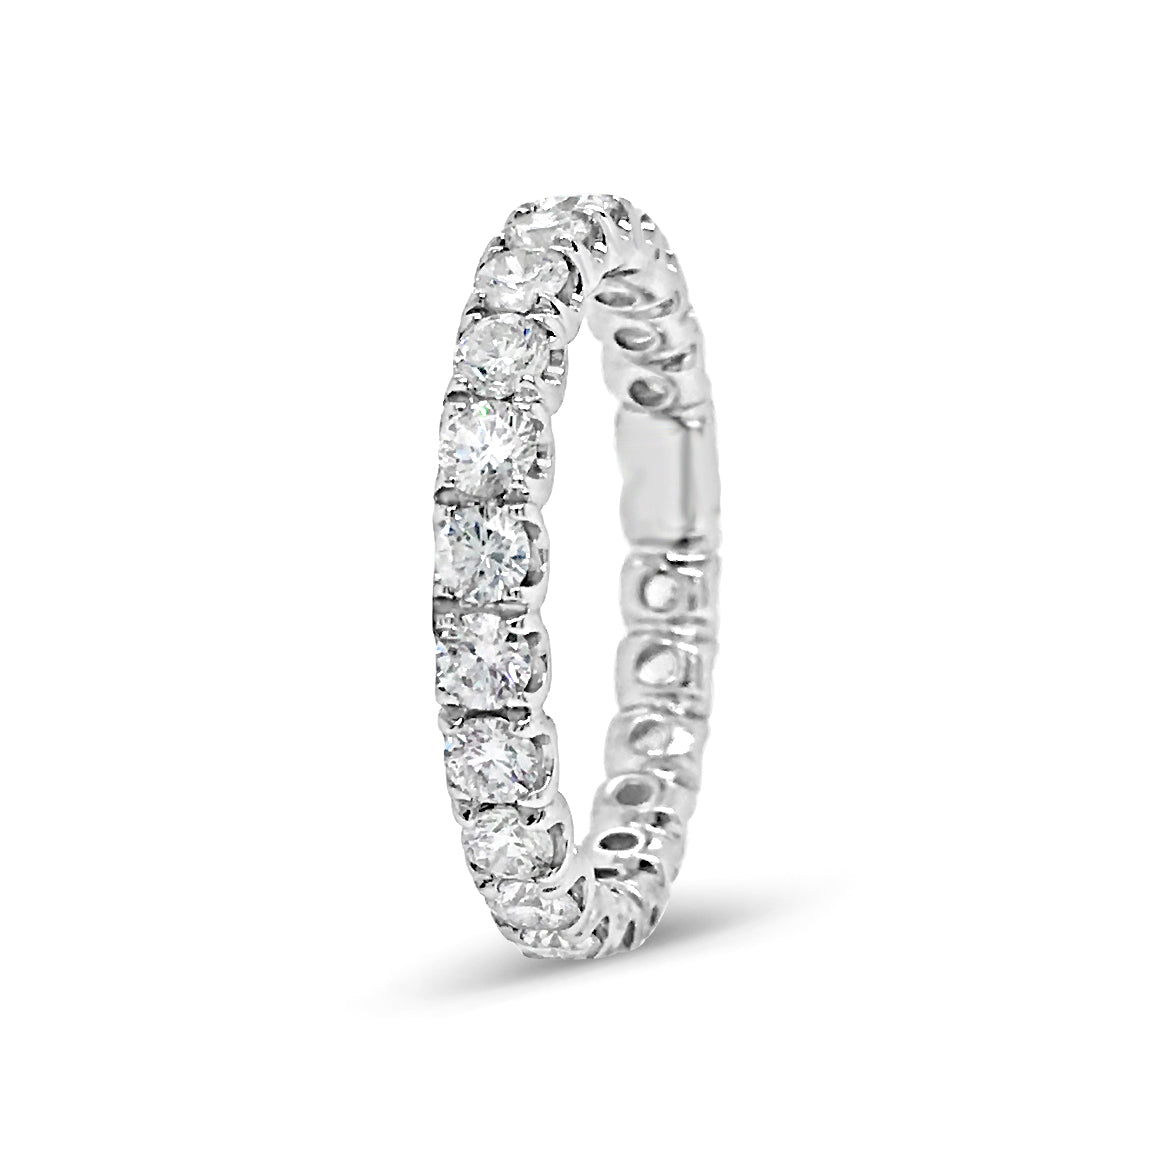 Simple Four Prong-Set Diamond Eternity Band  -18k gold weighing 2.38 grams  -24 round diamonds weighing 1.49 carats